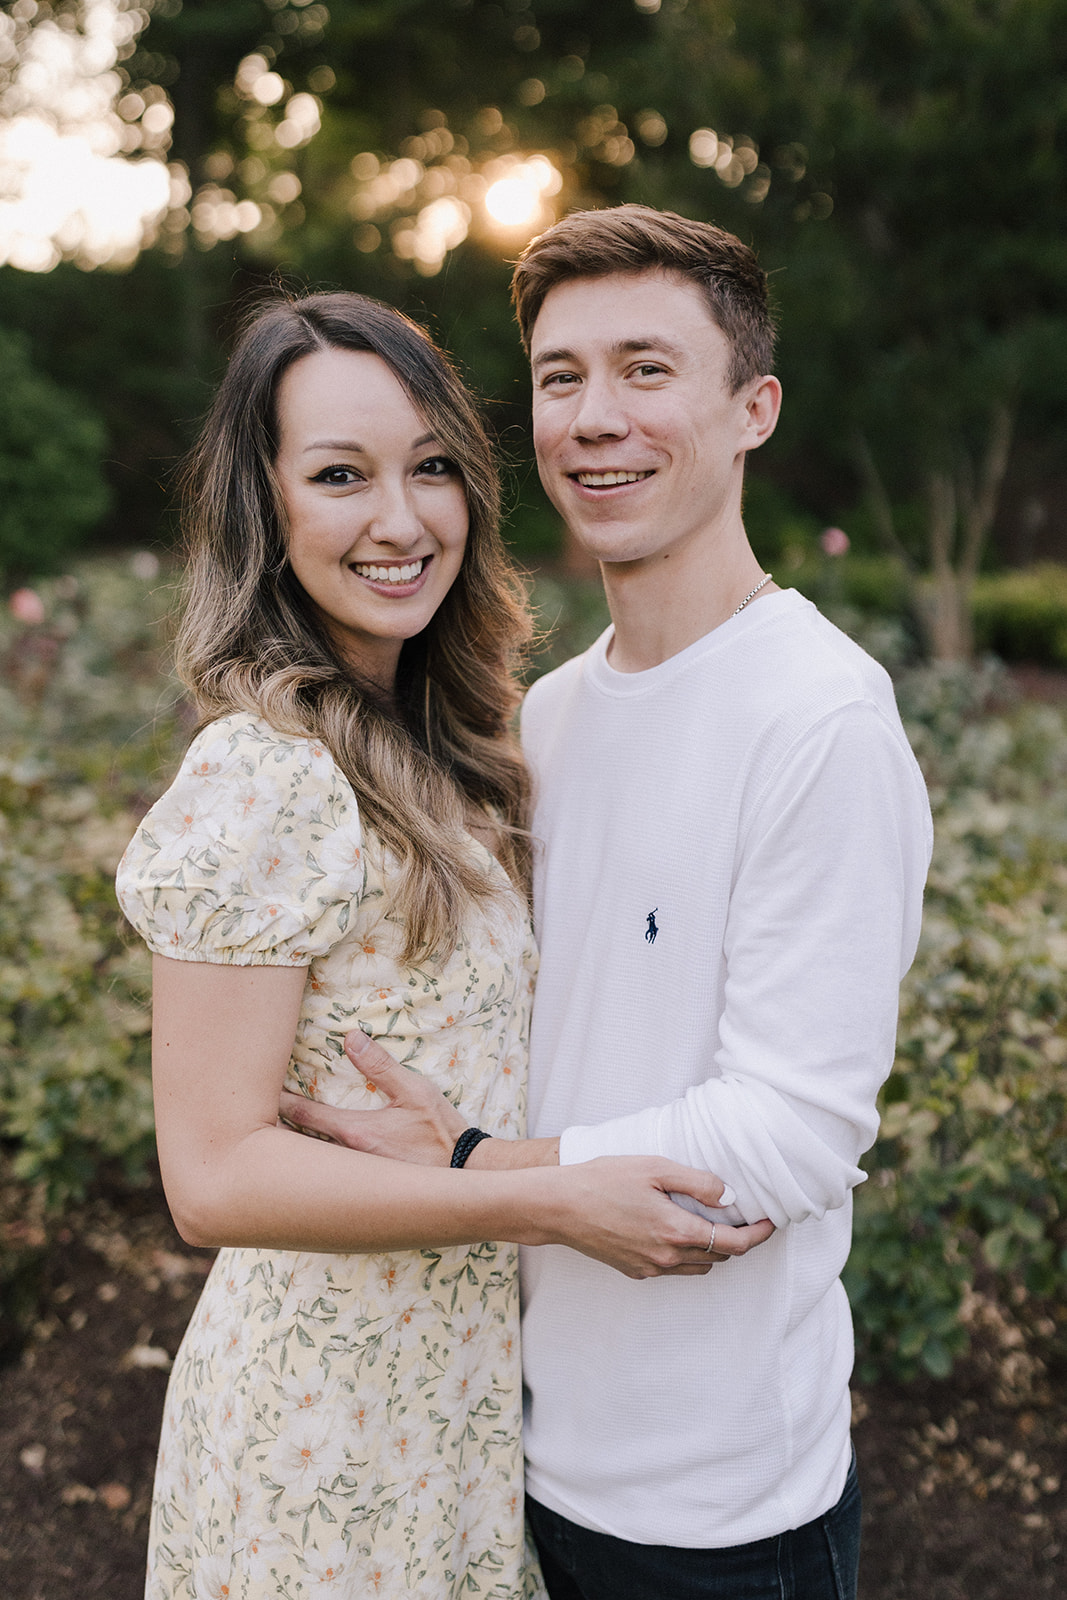 Couples Mini Session in Raleigh Rose Garden in North Carolina